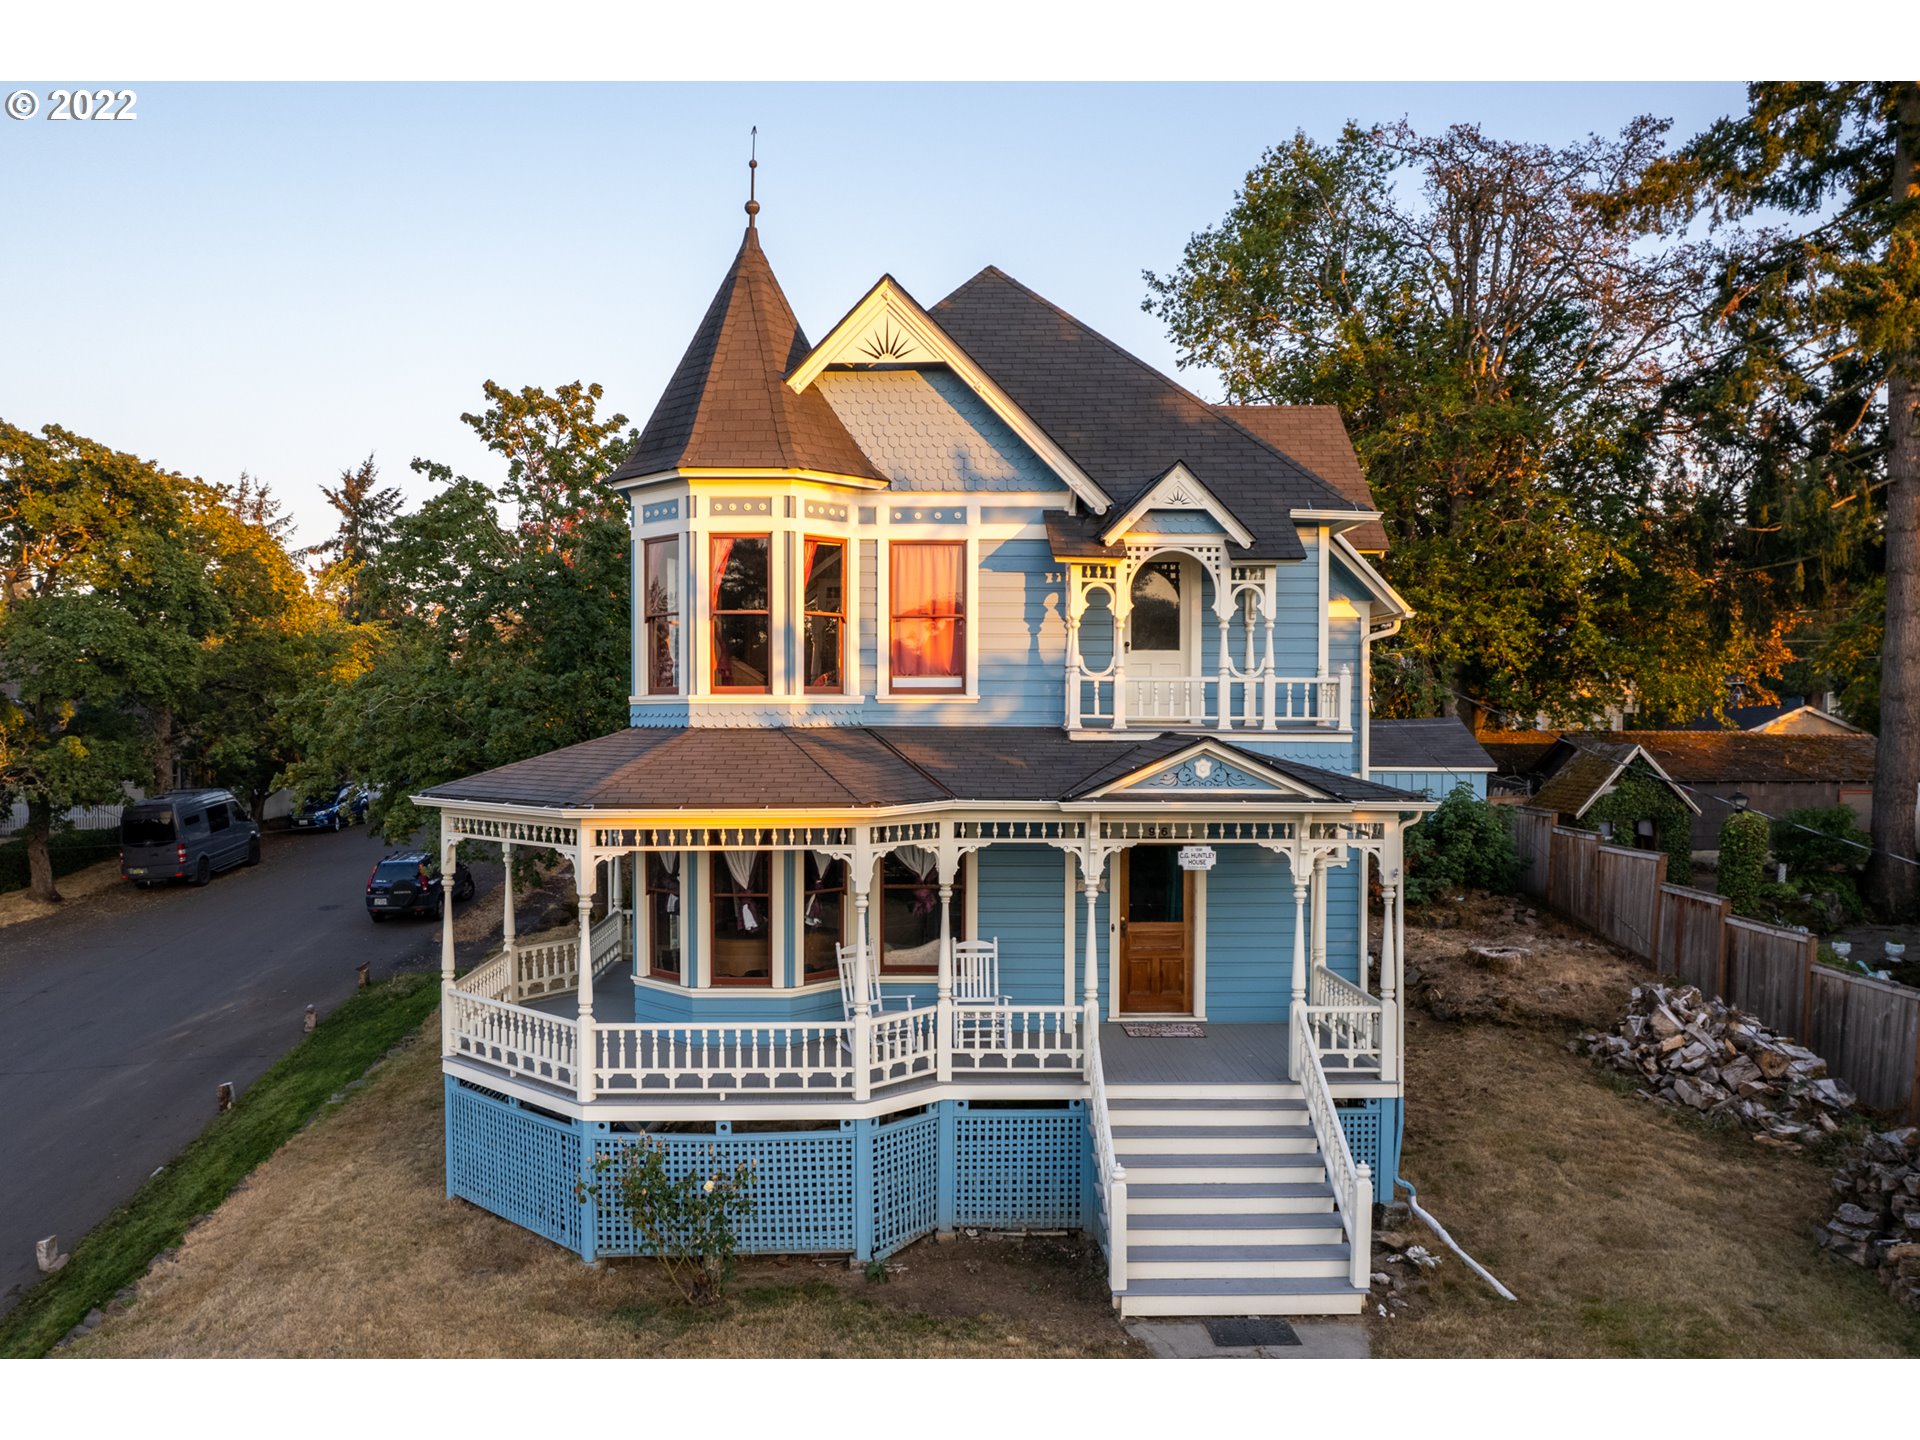 Welcome to the C.G. Huntley House. Undoubtedly one of the most iconic homes in Oregon City. This amazing 1896 Queen Anne is ready for someone to sit back and just enjoy all of it's extensively restored original beauty and detail - stained glass, built ins, unpainted moldings. All while under your new roof, new electrical and plumbing, sewer line, furnace, hot water heater and much more! Located in the McLoughlin historic district and in the heart of the booming Oregon City market.